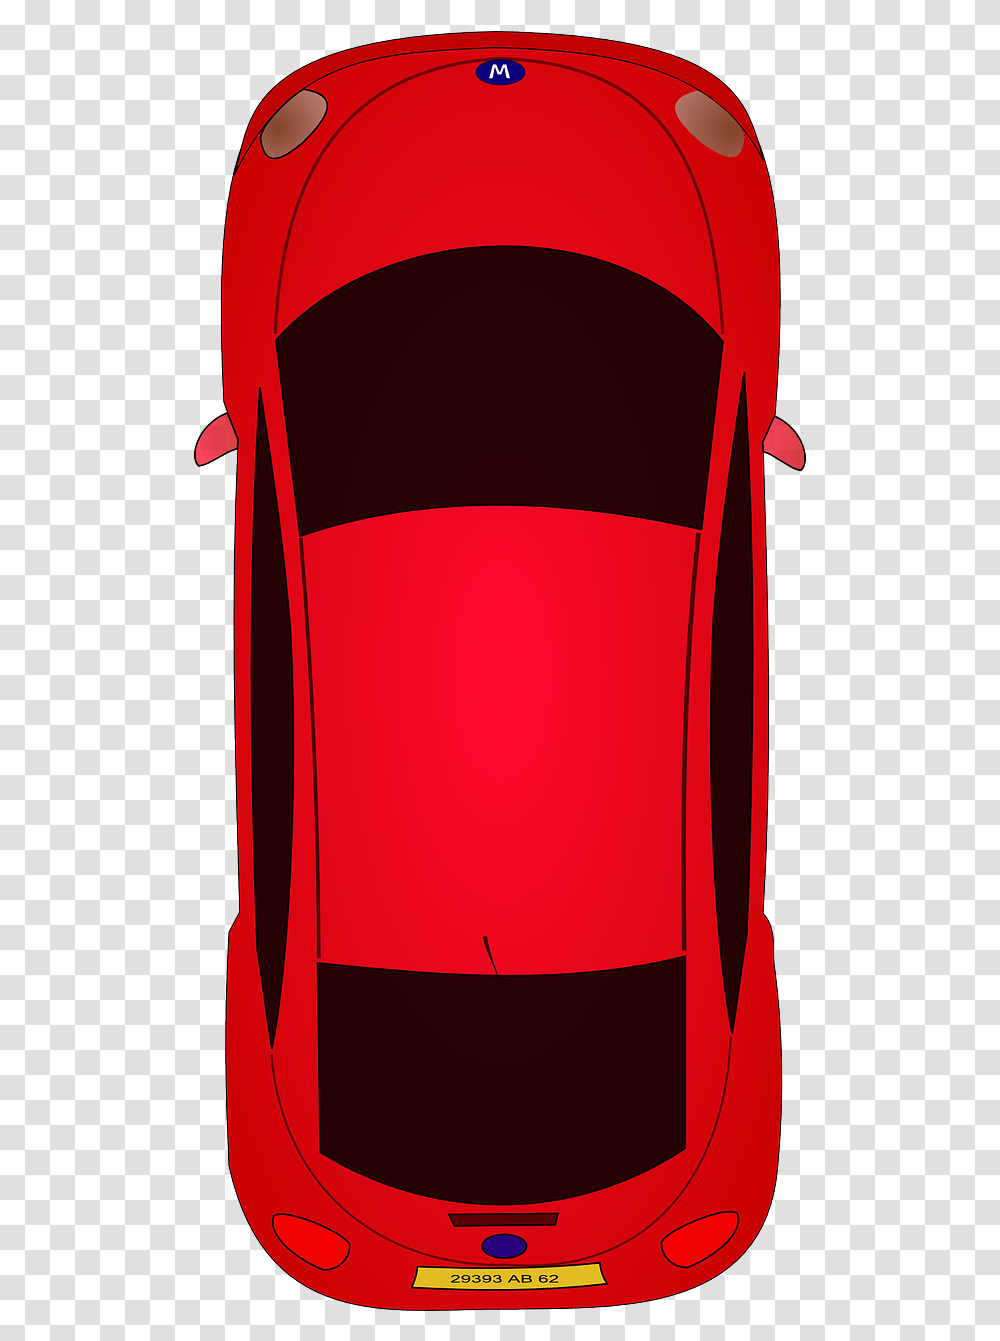 Car Vehicle Red Free Vector Graphic On Pixabay 2d Car Top View, Pillow, Cushion, Maroon, Furniture Transparent Png